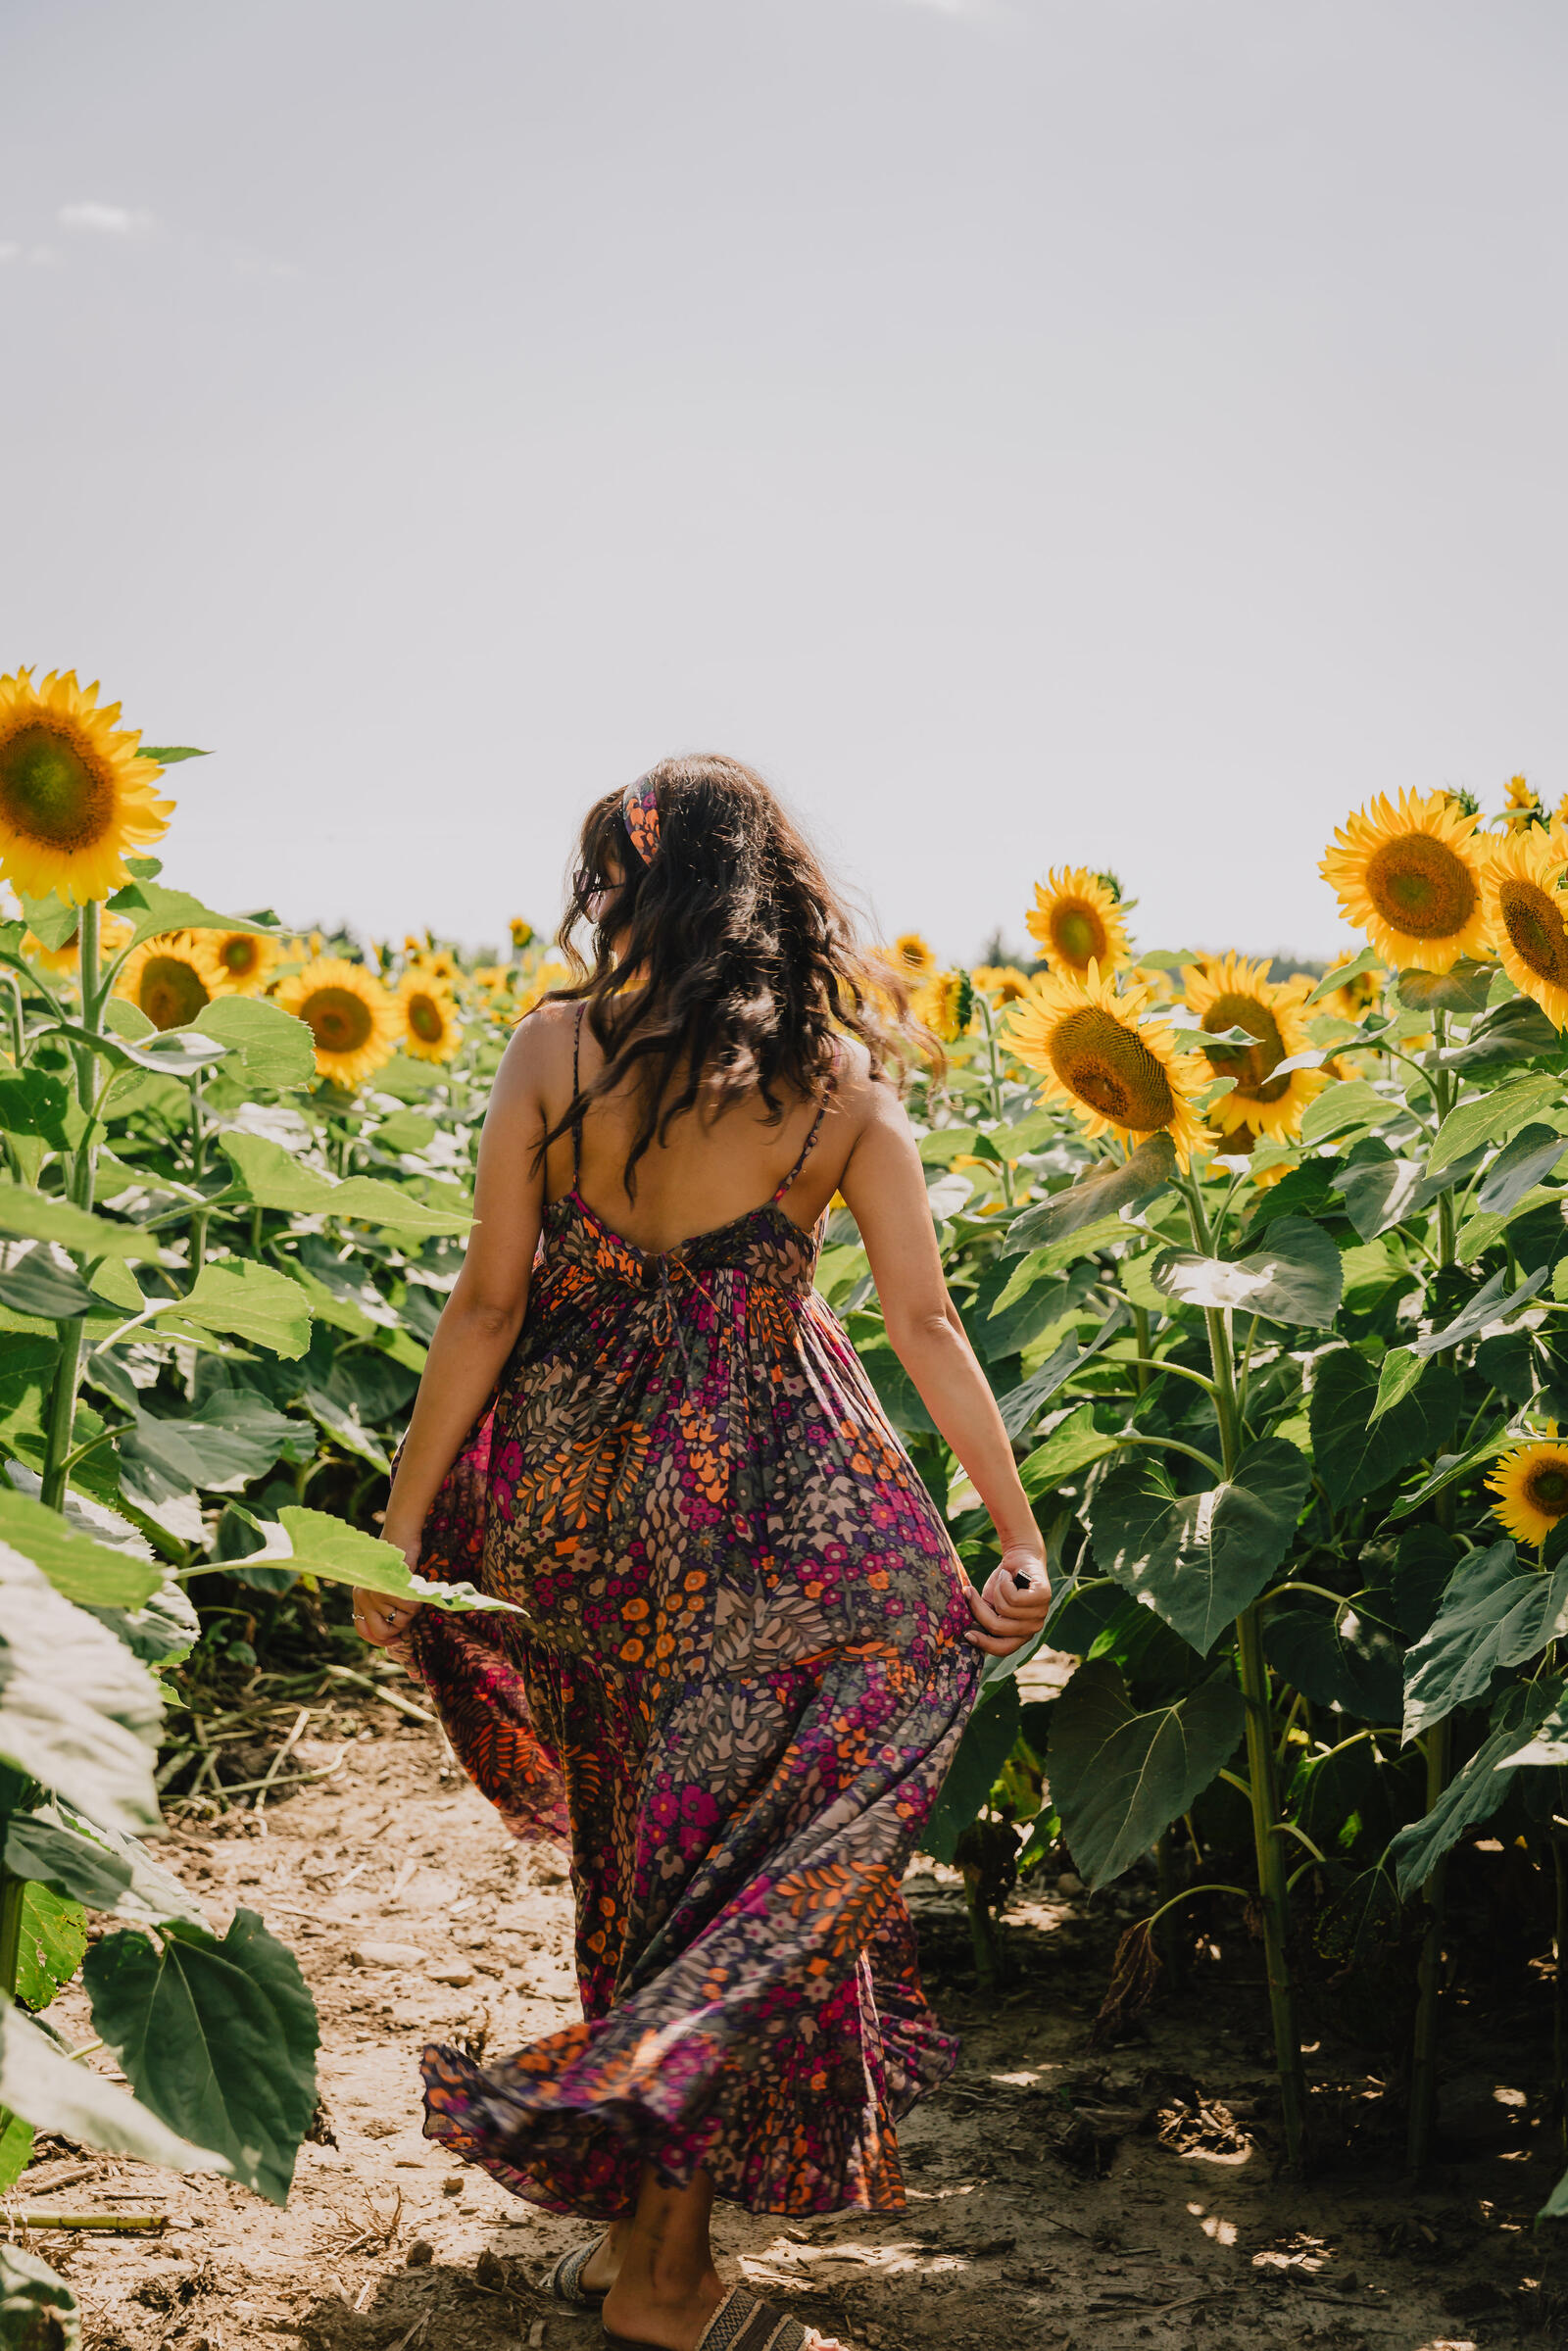 Free photo A girl in a dress walking among the sunflowers